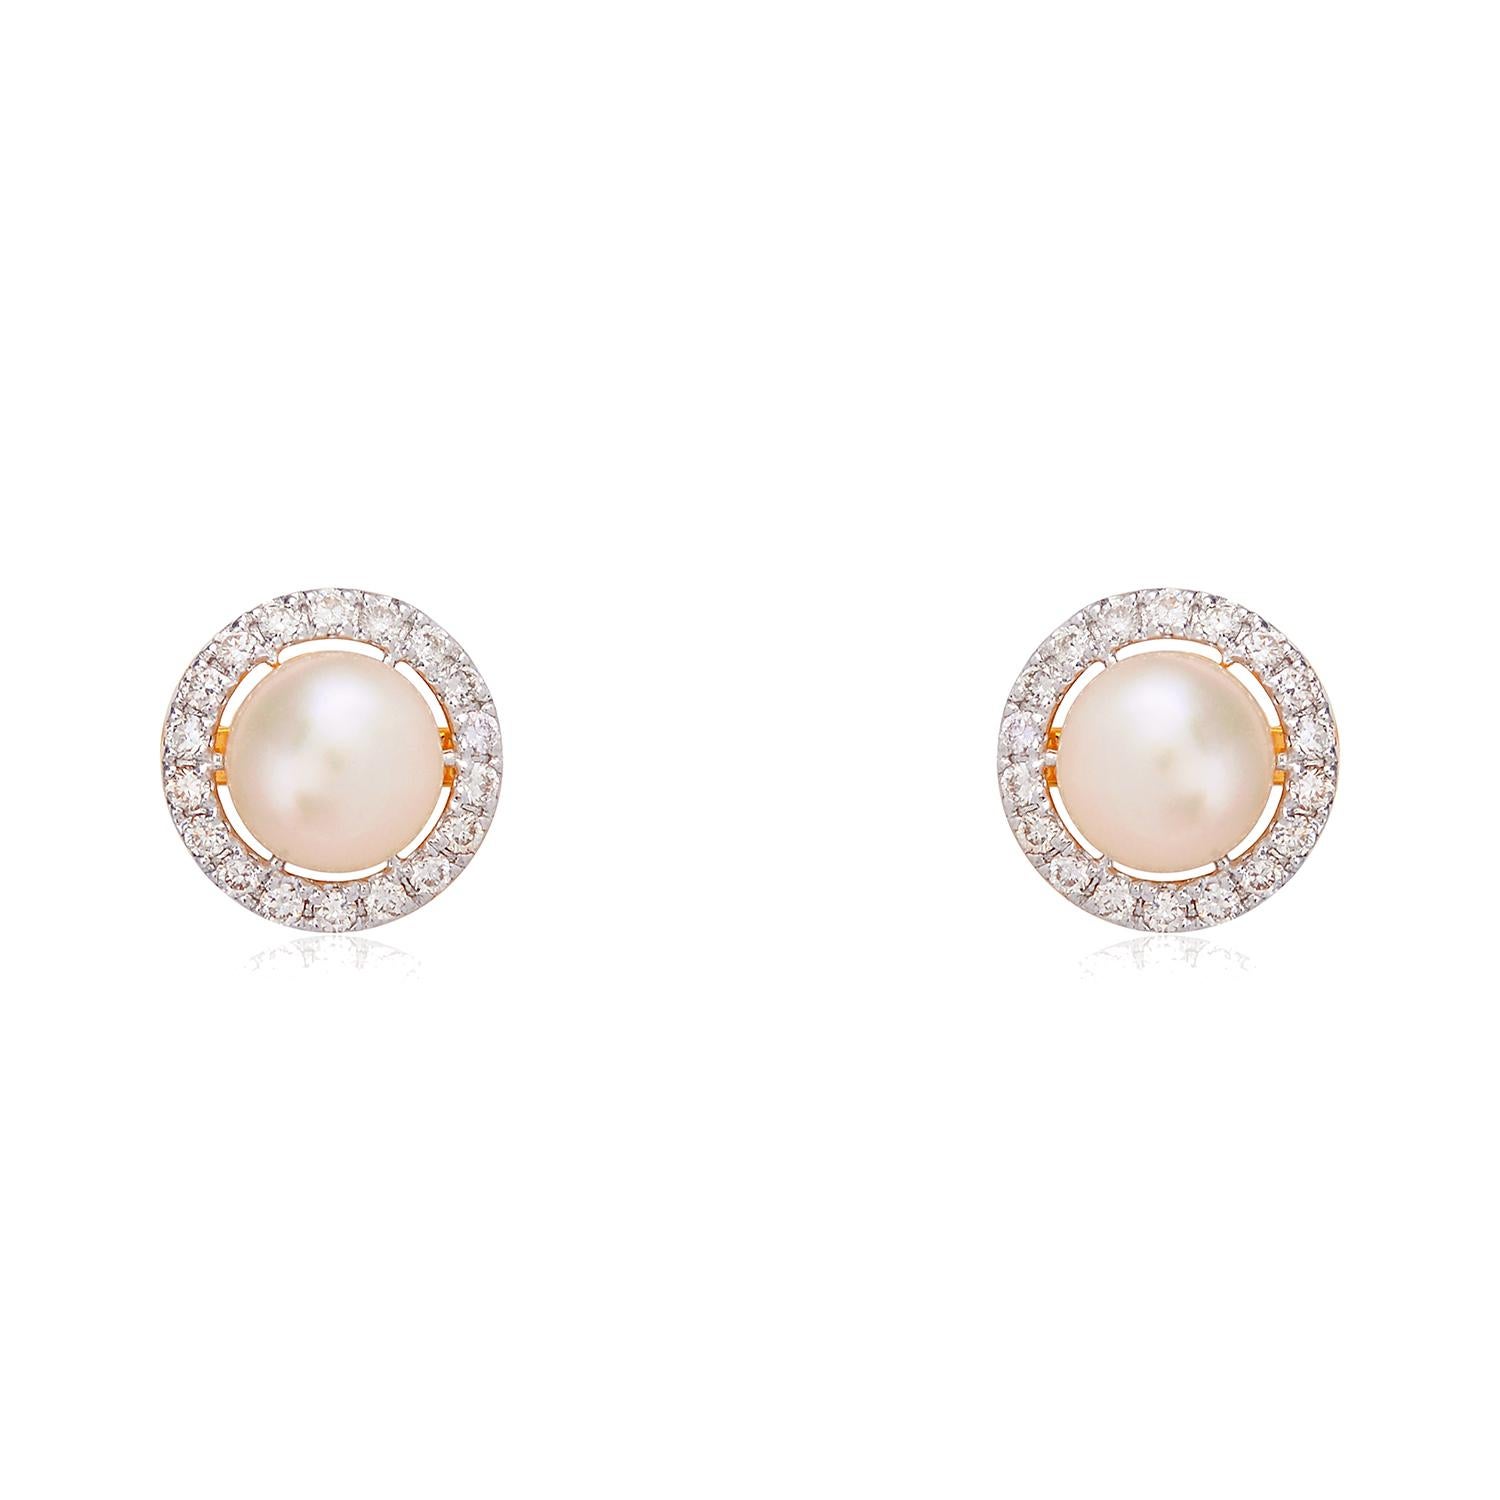 Brilliant Cut Pearl Stud Earrings with Diamond in 14k Gold For Sale